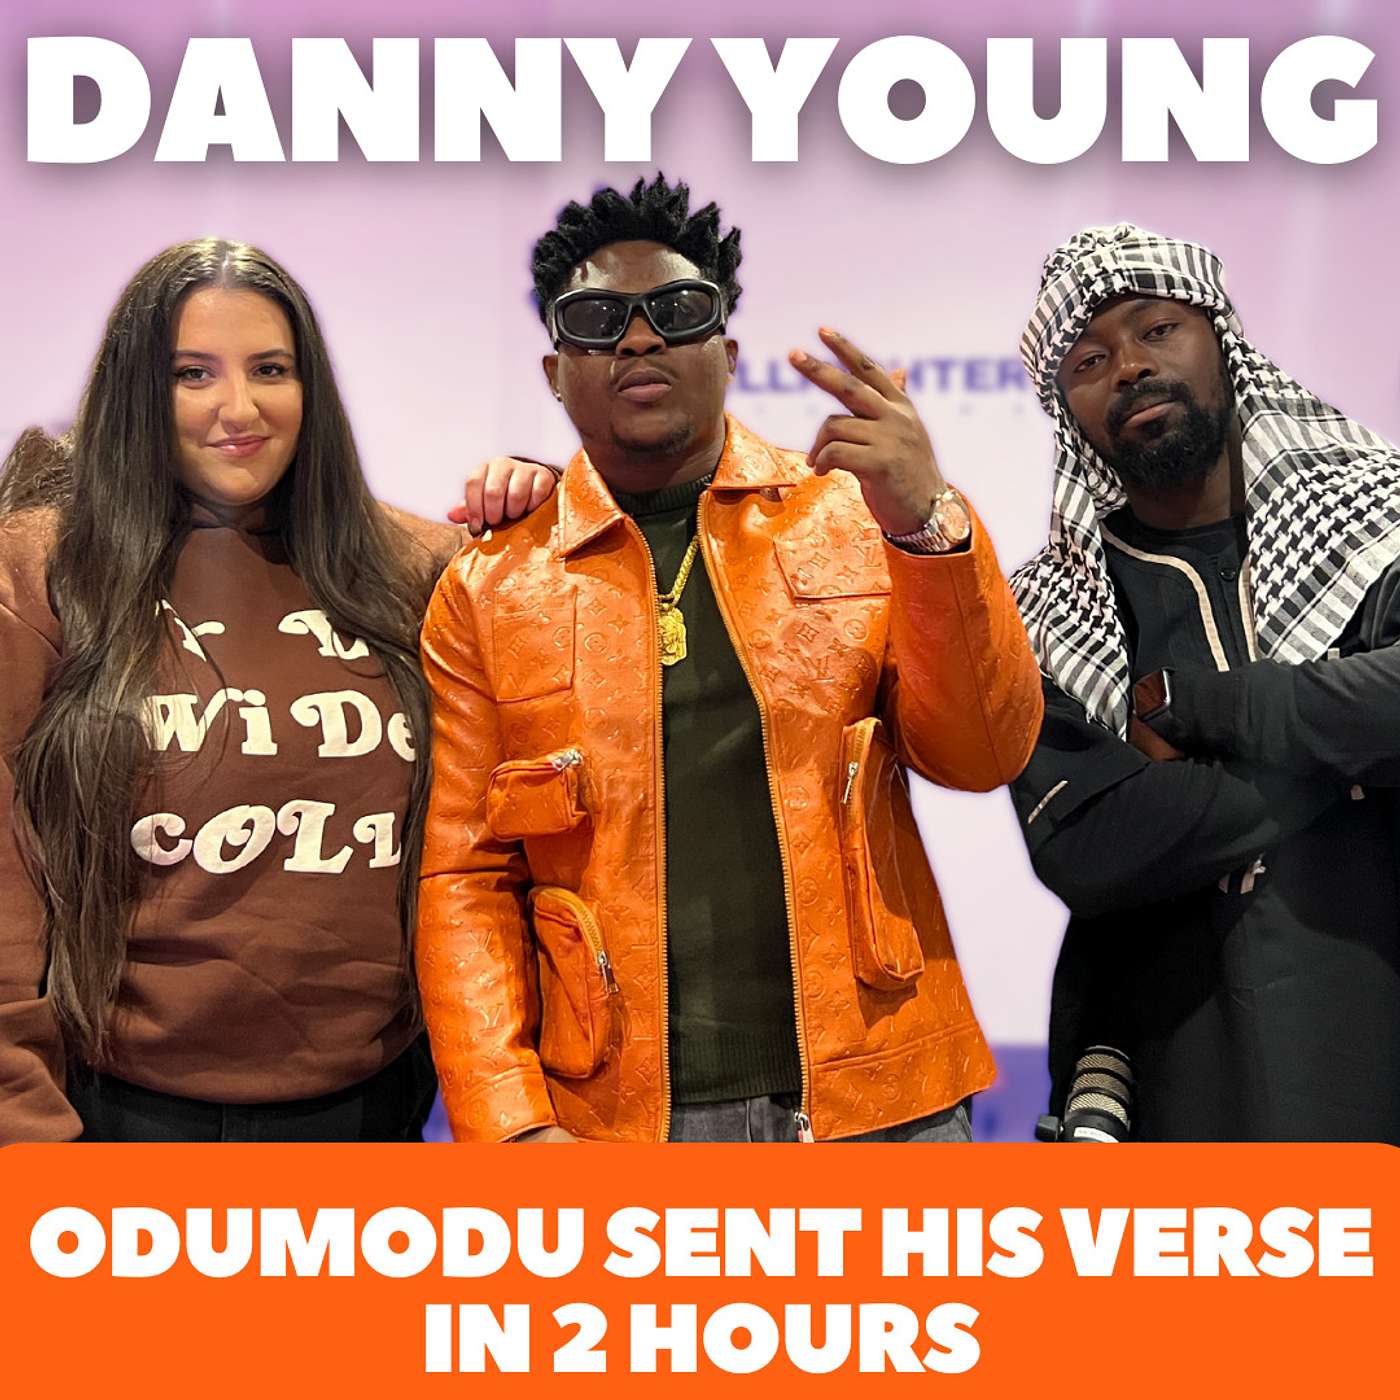 Danny Young: "Odumodublvck sent his verse in 2 hours"